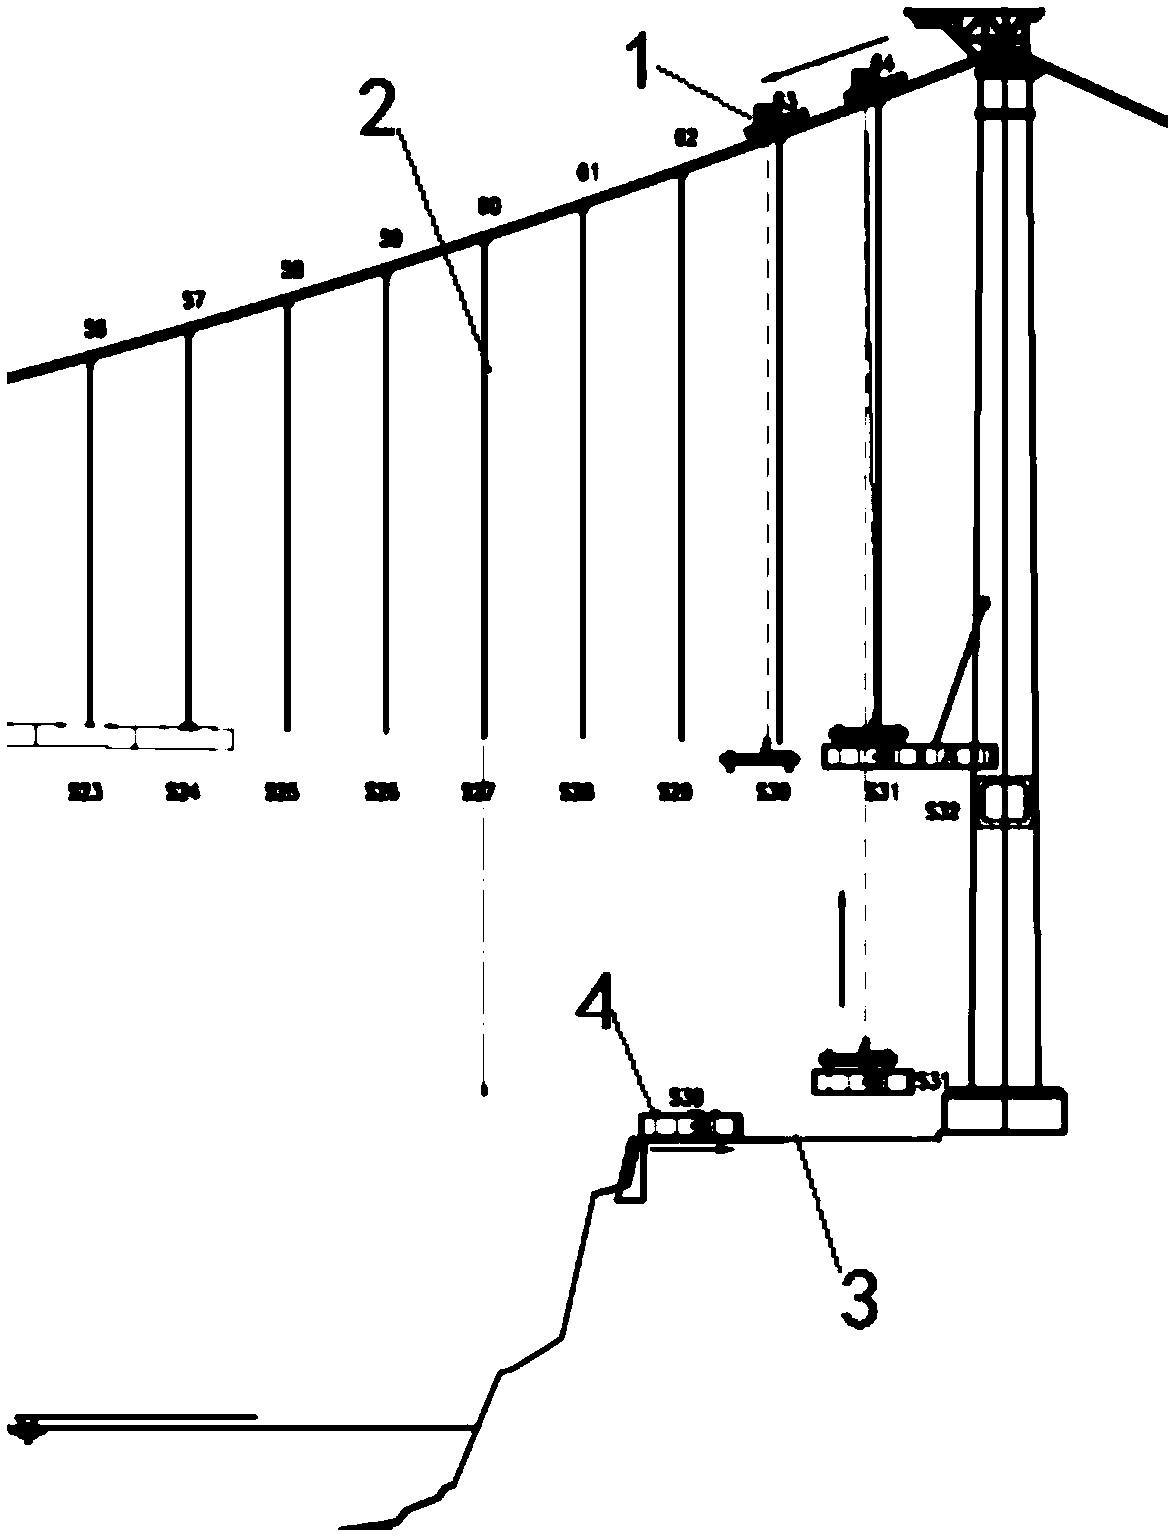 Installation device and method for swinging and moving long slings of girder sections on bank slopes of suspension bridges